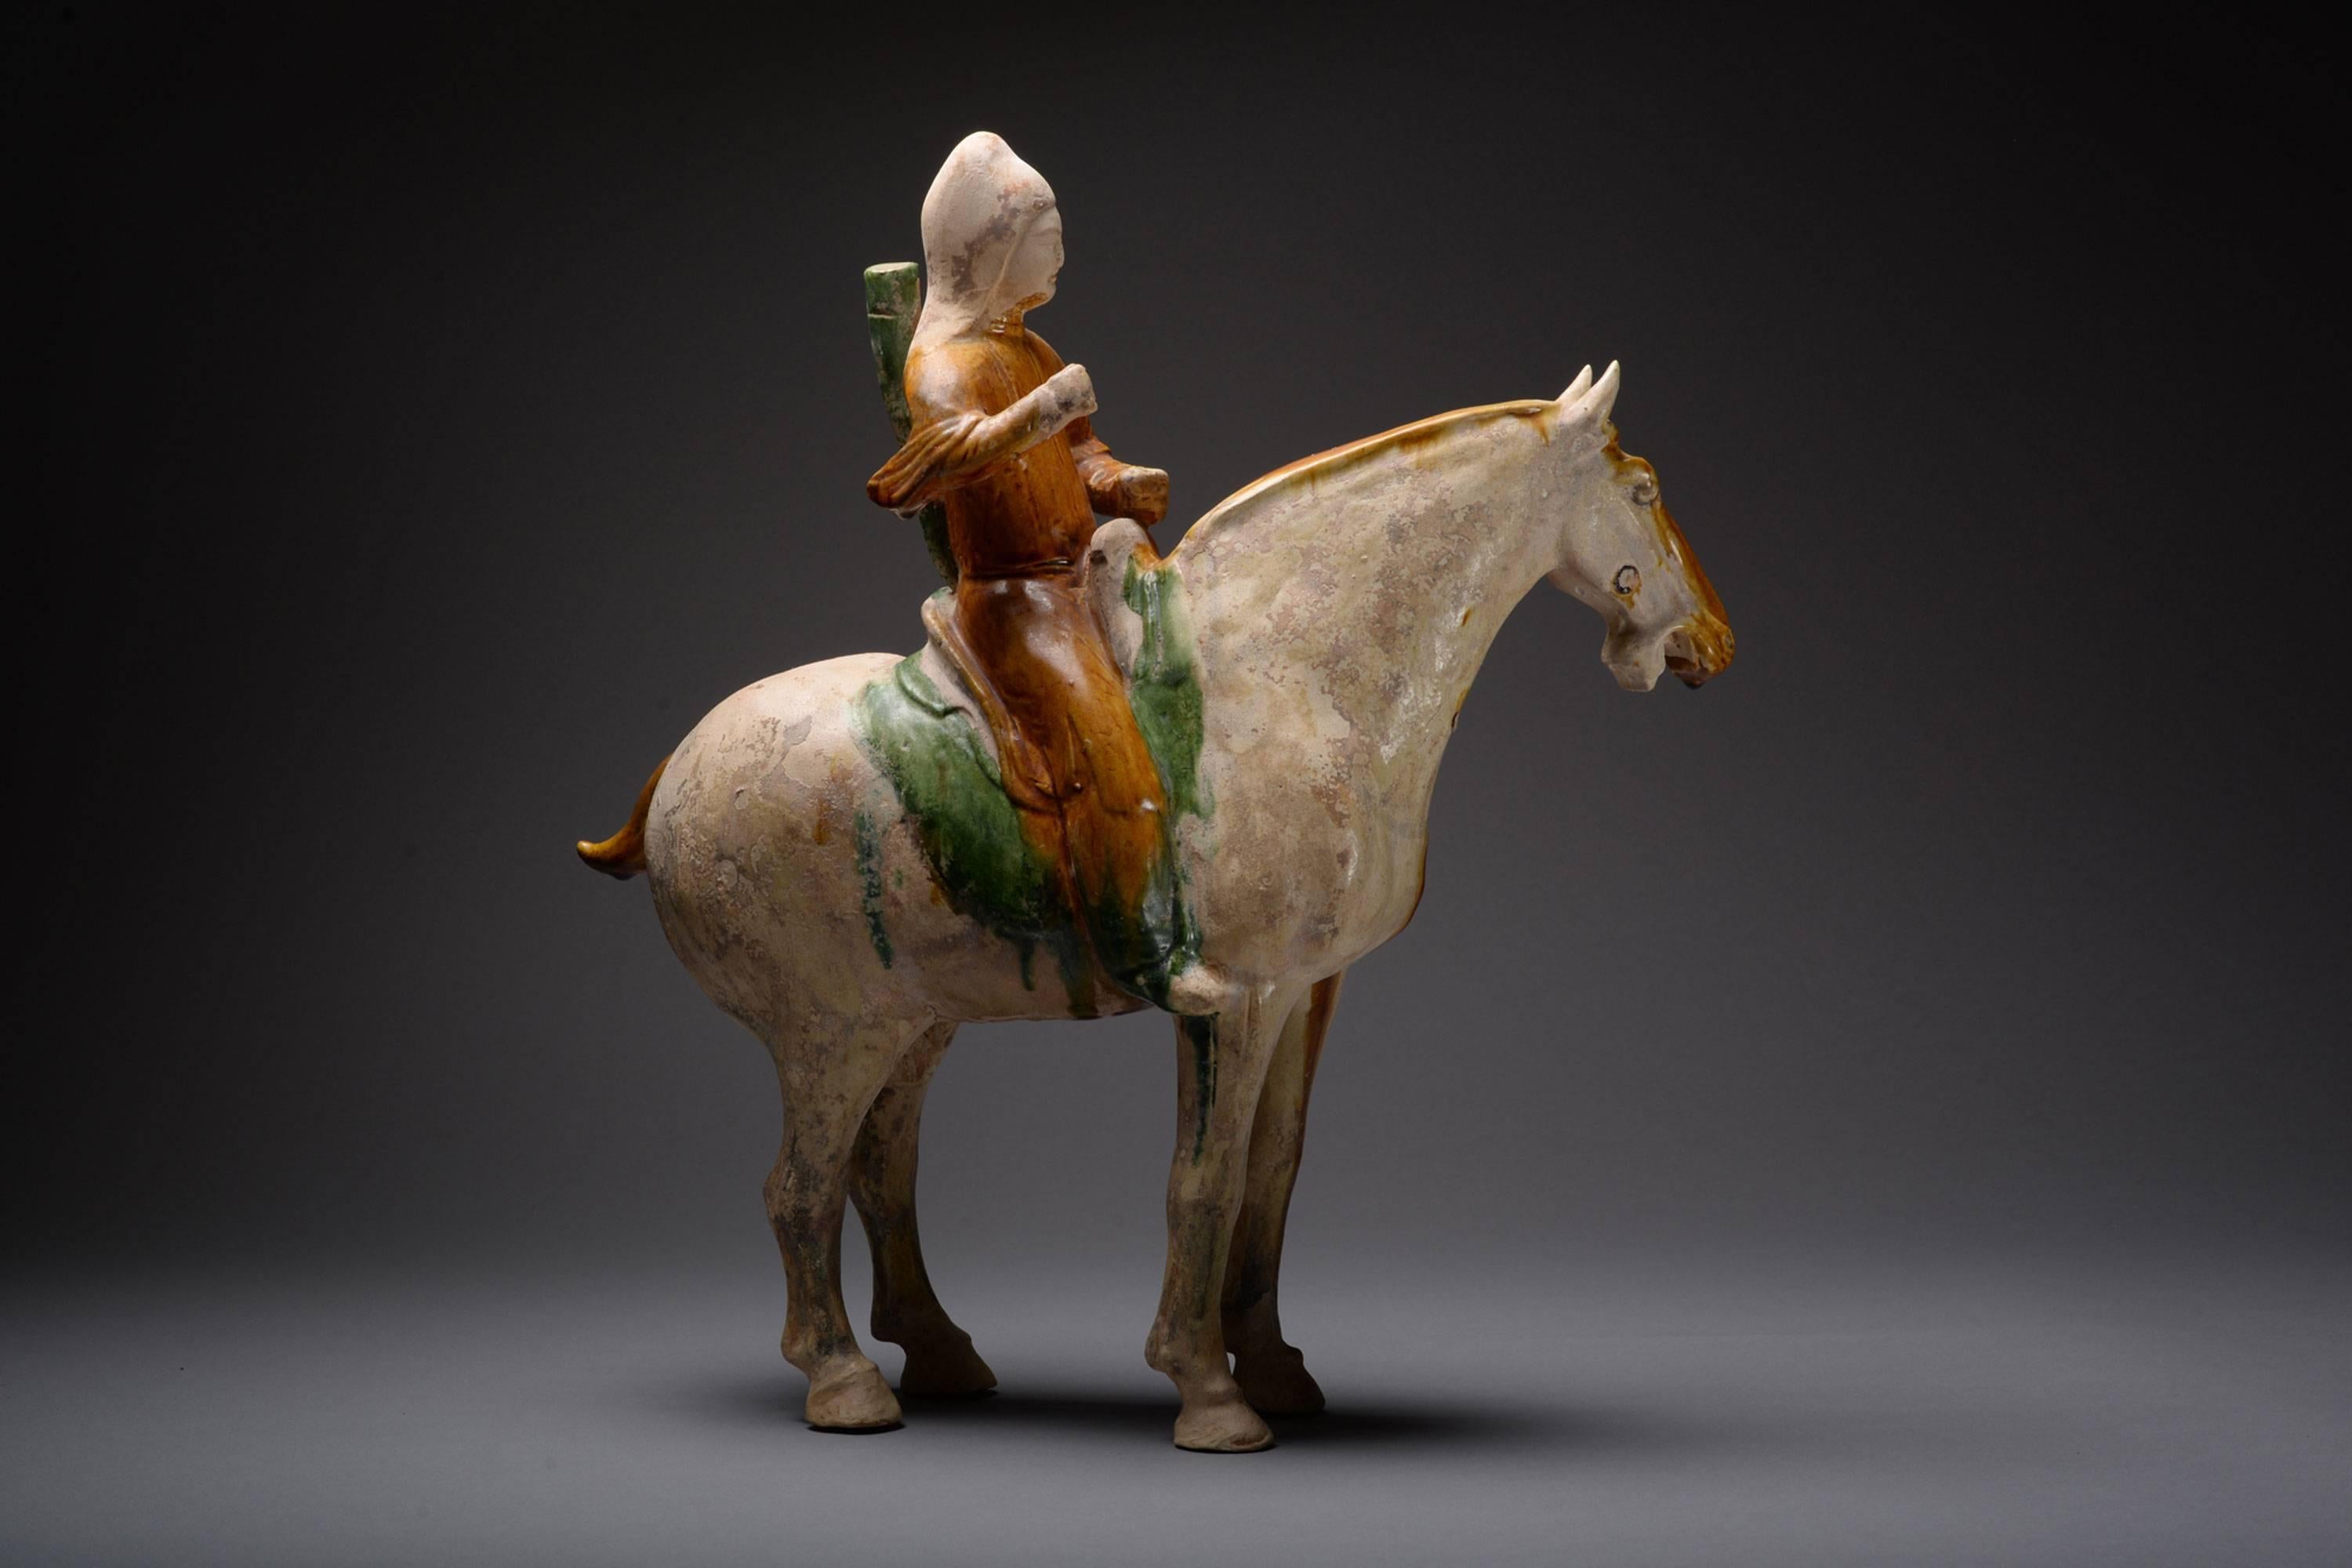 A magnificent ancient Chinese pottery figure of an Archer on horseback, dating to the Tang dynasty, approximately 618-907 AD.

The horse stands foursquare, head turned slightly to the left, mouth open. Its body with straw glaze, save for a deep